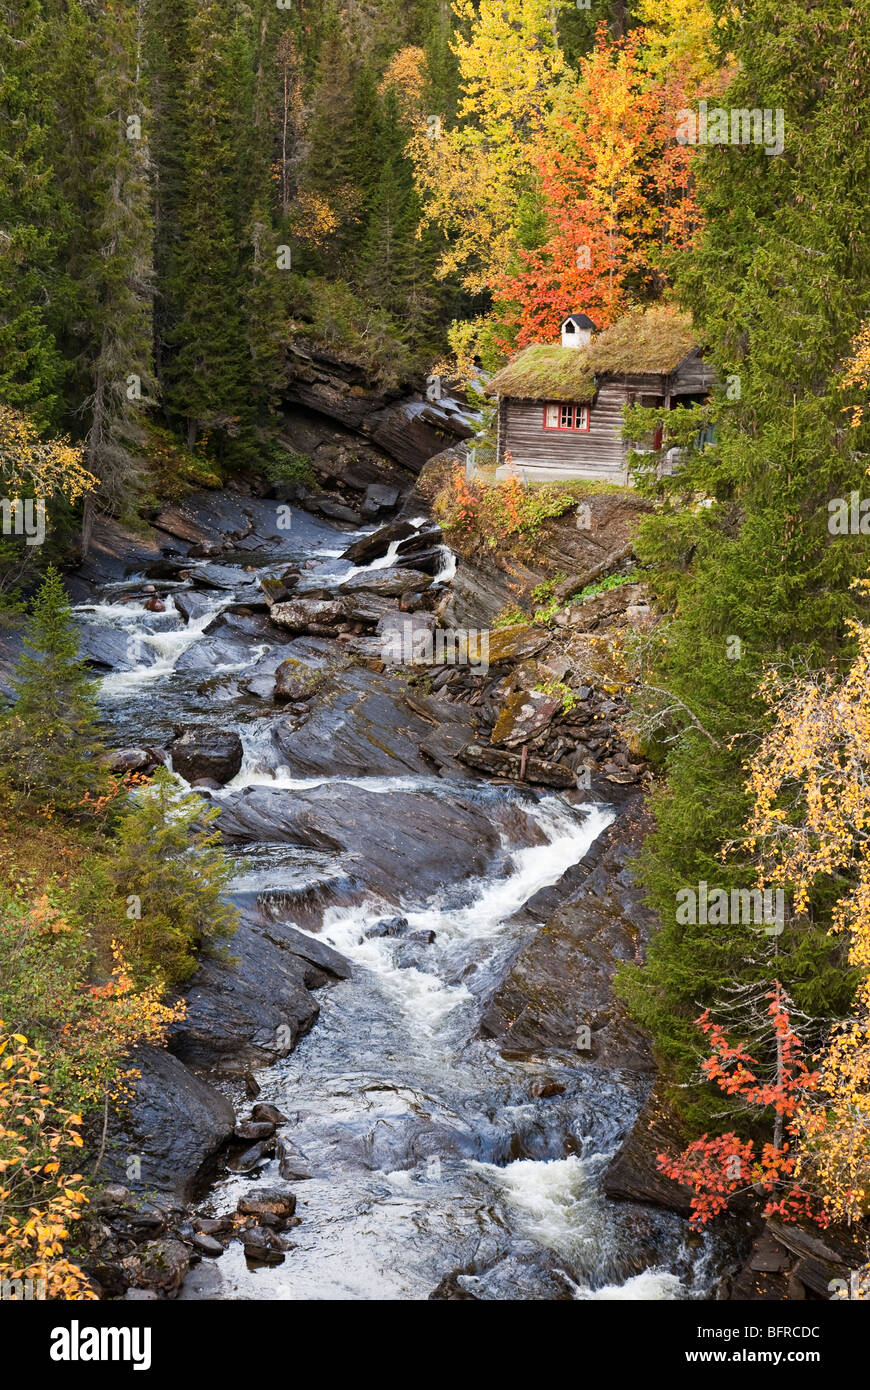 Forest and brook with iconic wooden traditional forest hut in autumn with autumn colours on birches and aspens Åre Jämtland Stock Photo